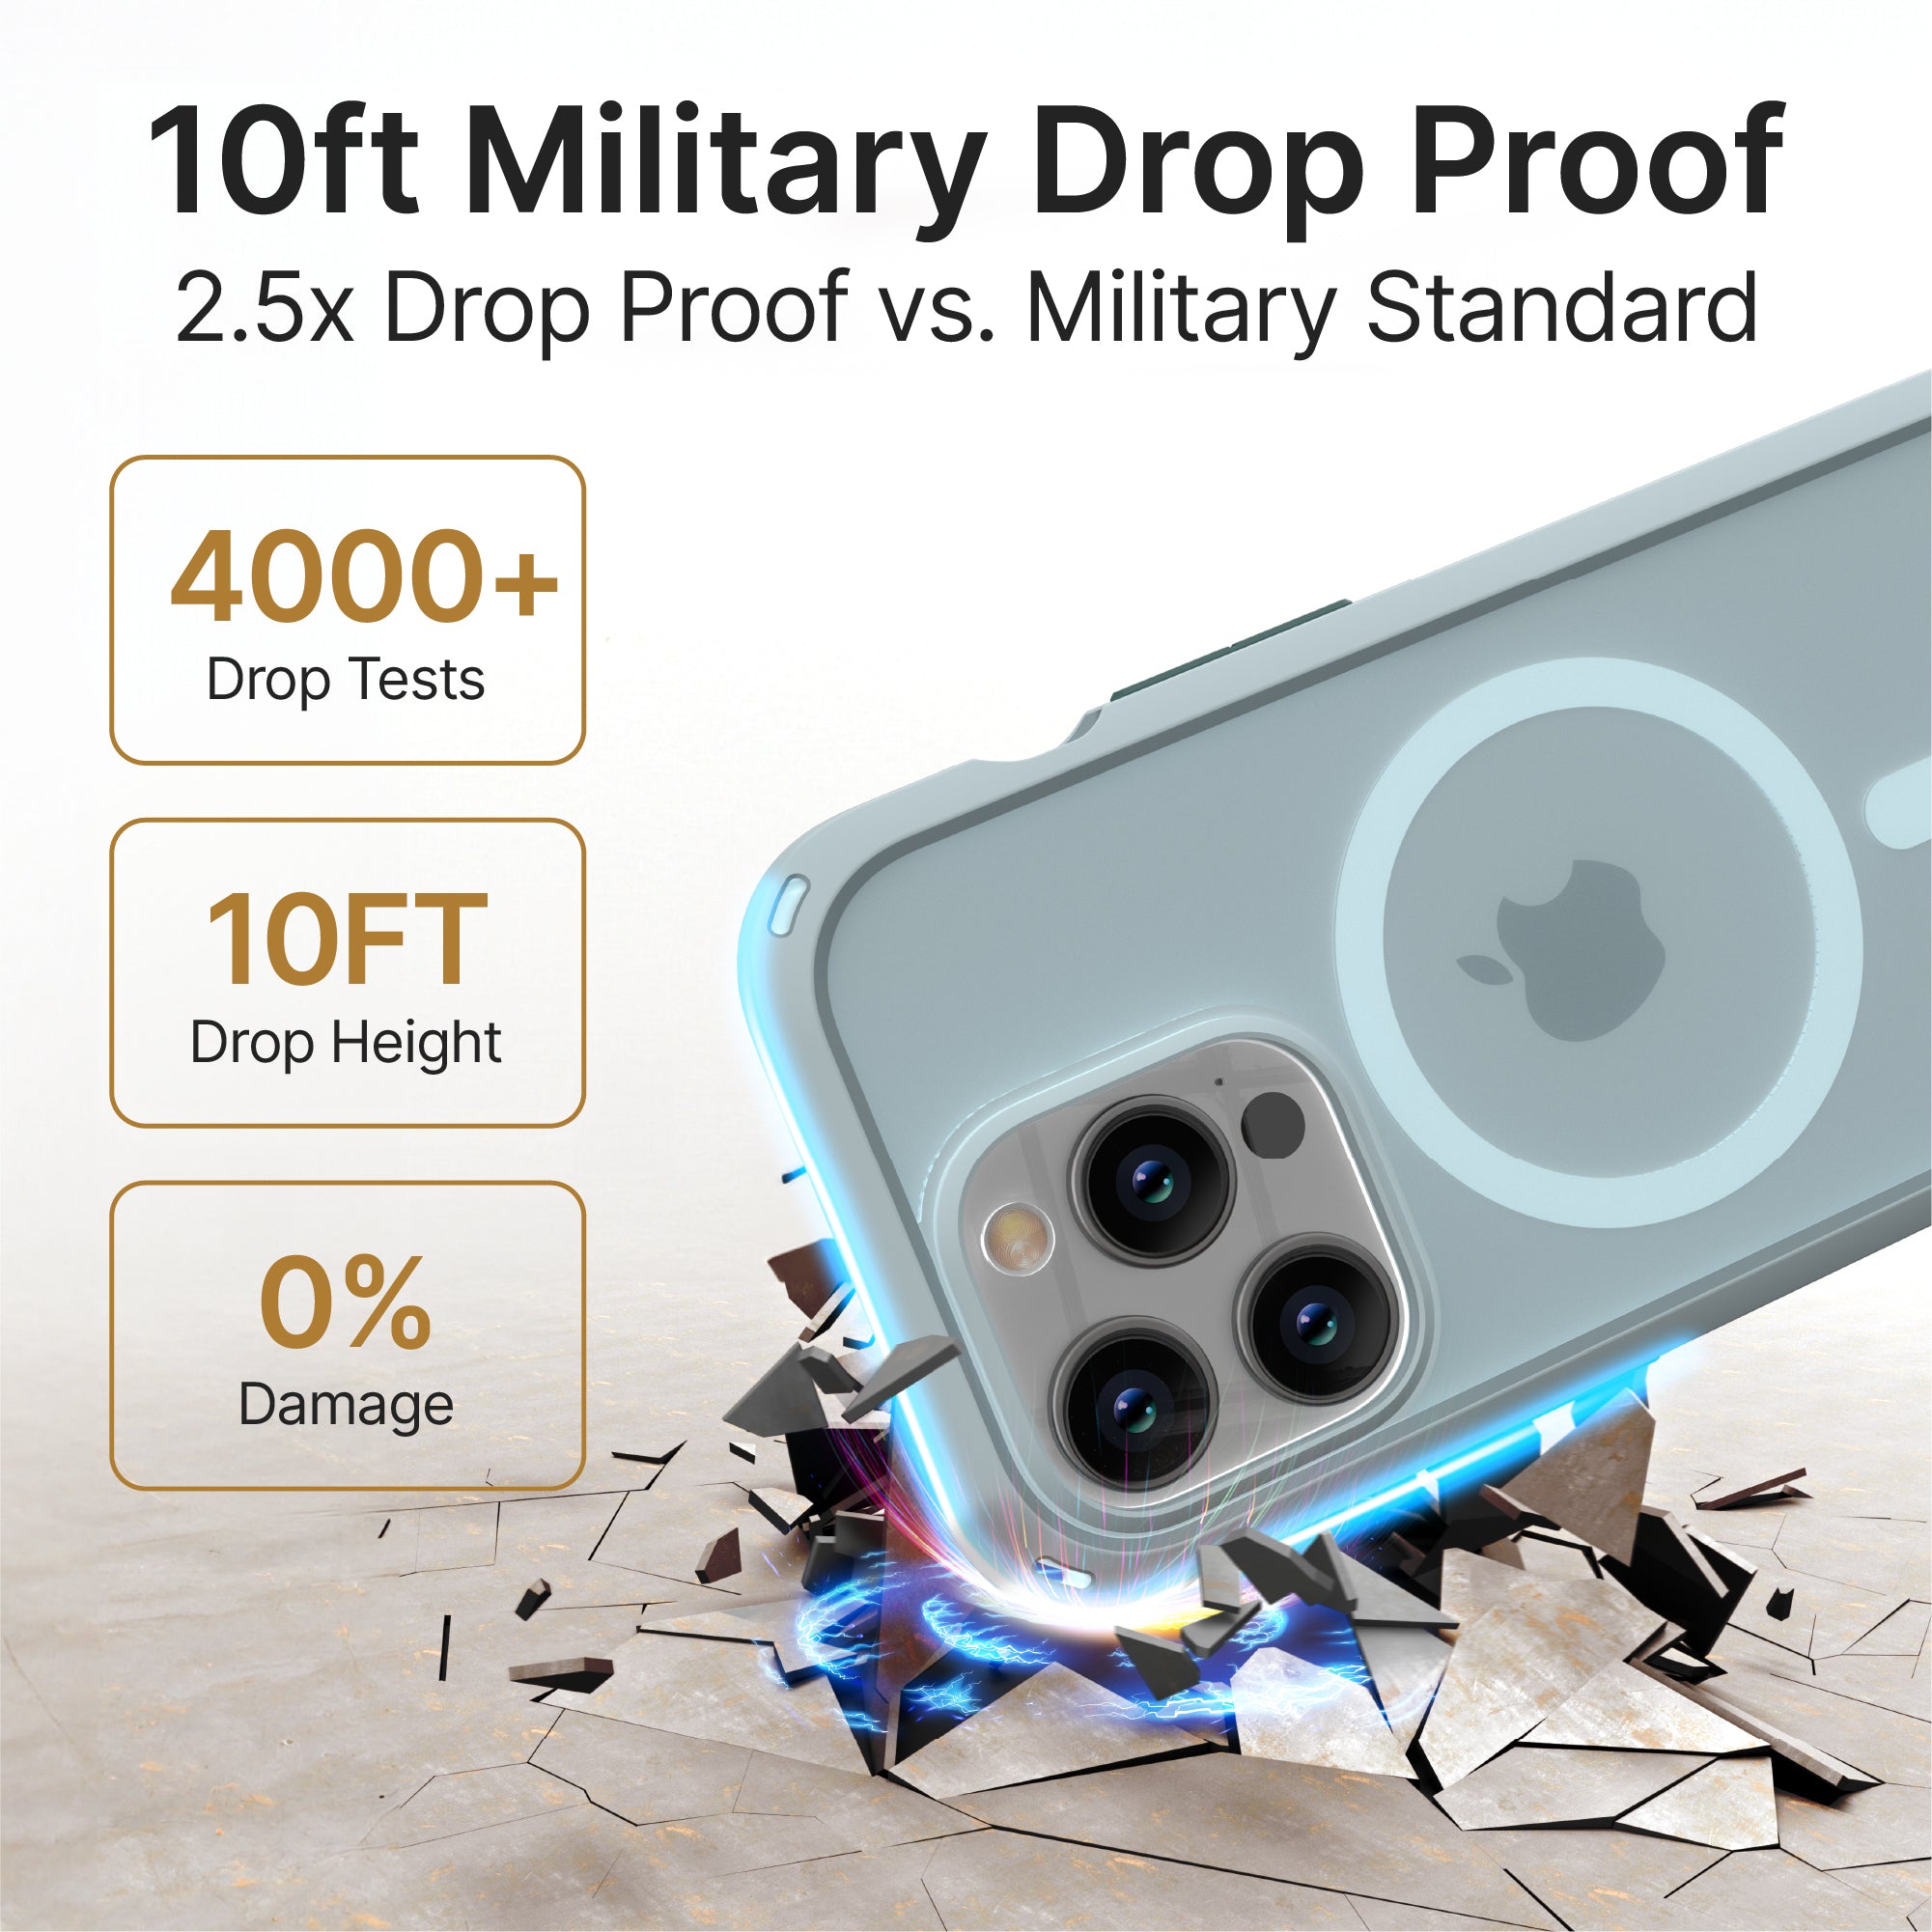 catalyst iphone 15 series influence case magsafe compatible sage green for iphone 15 pro with cracked floor text reads 10ft military drop proof 2.5x drop proof vs military standard 4000+ drop tests 10ft drop height 0% damage